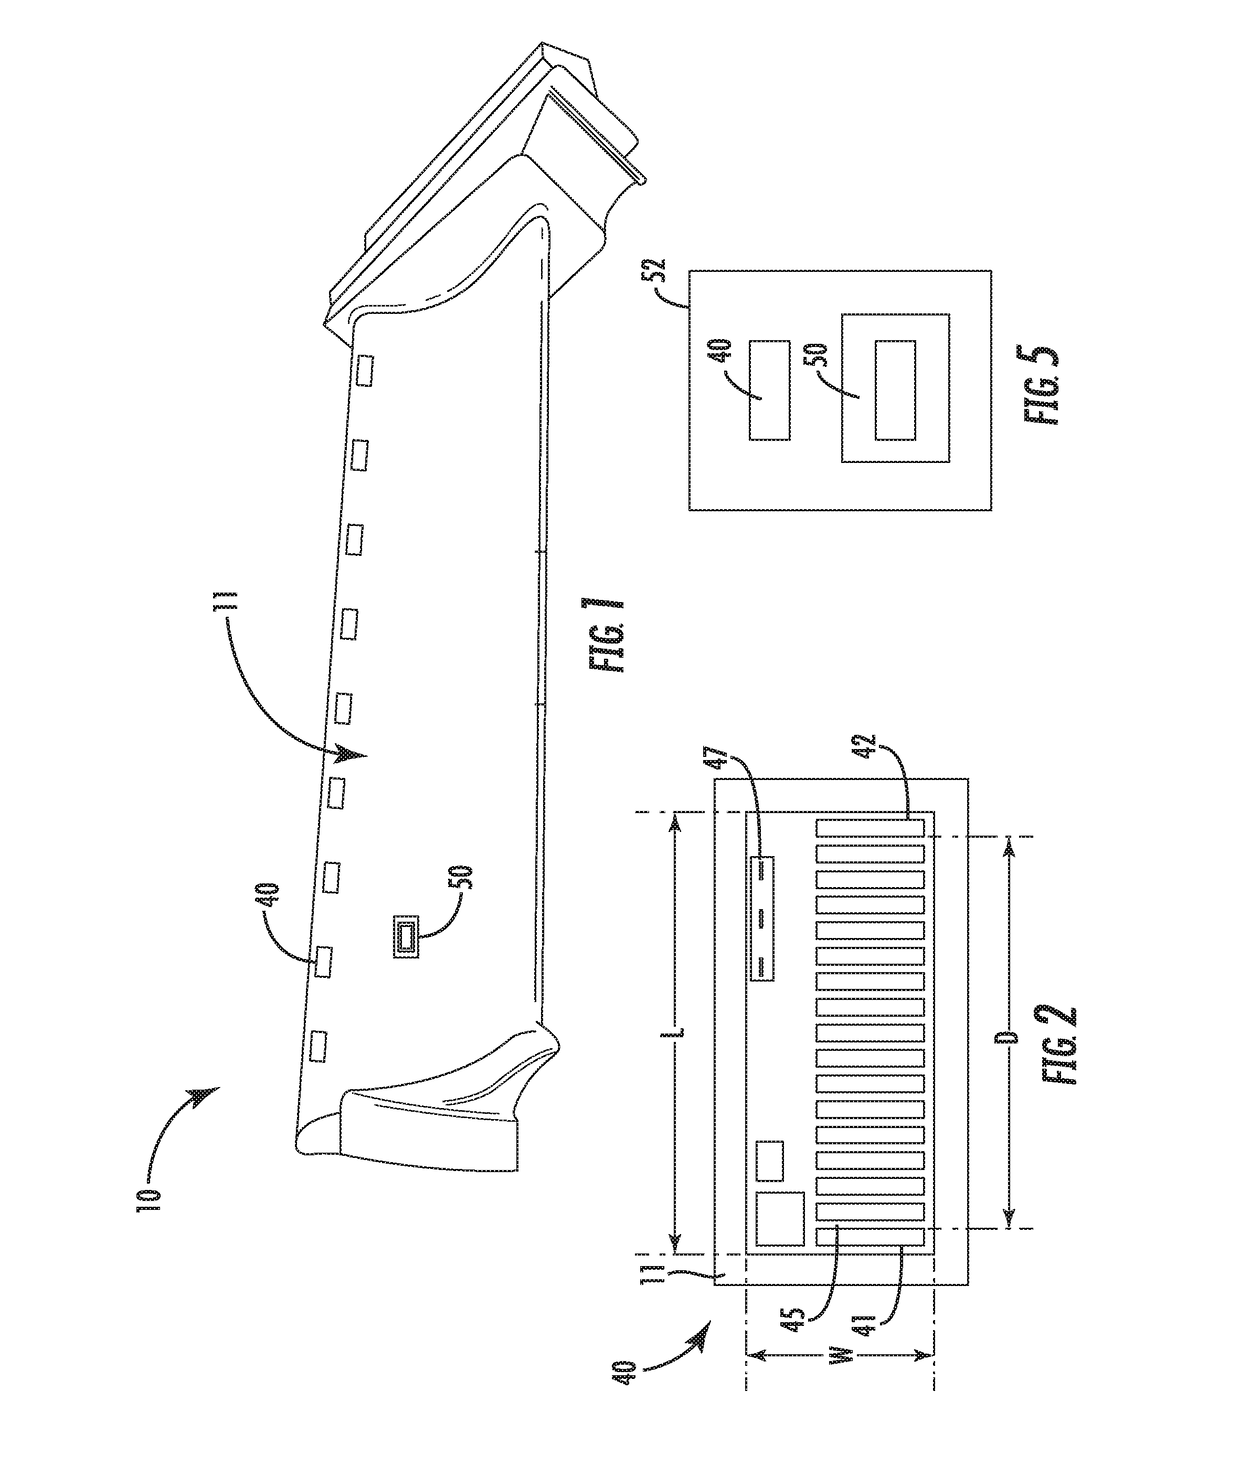 Systems and methods for evaluating component strain